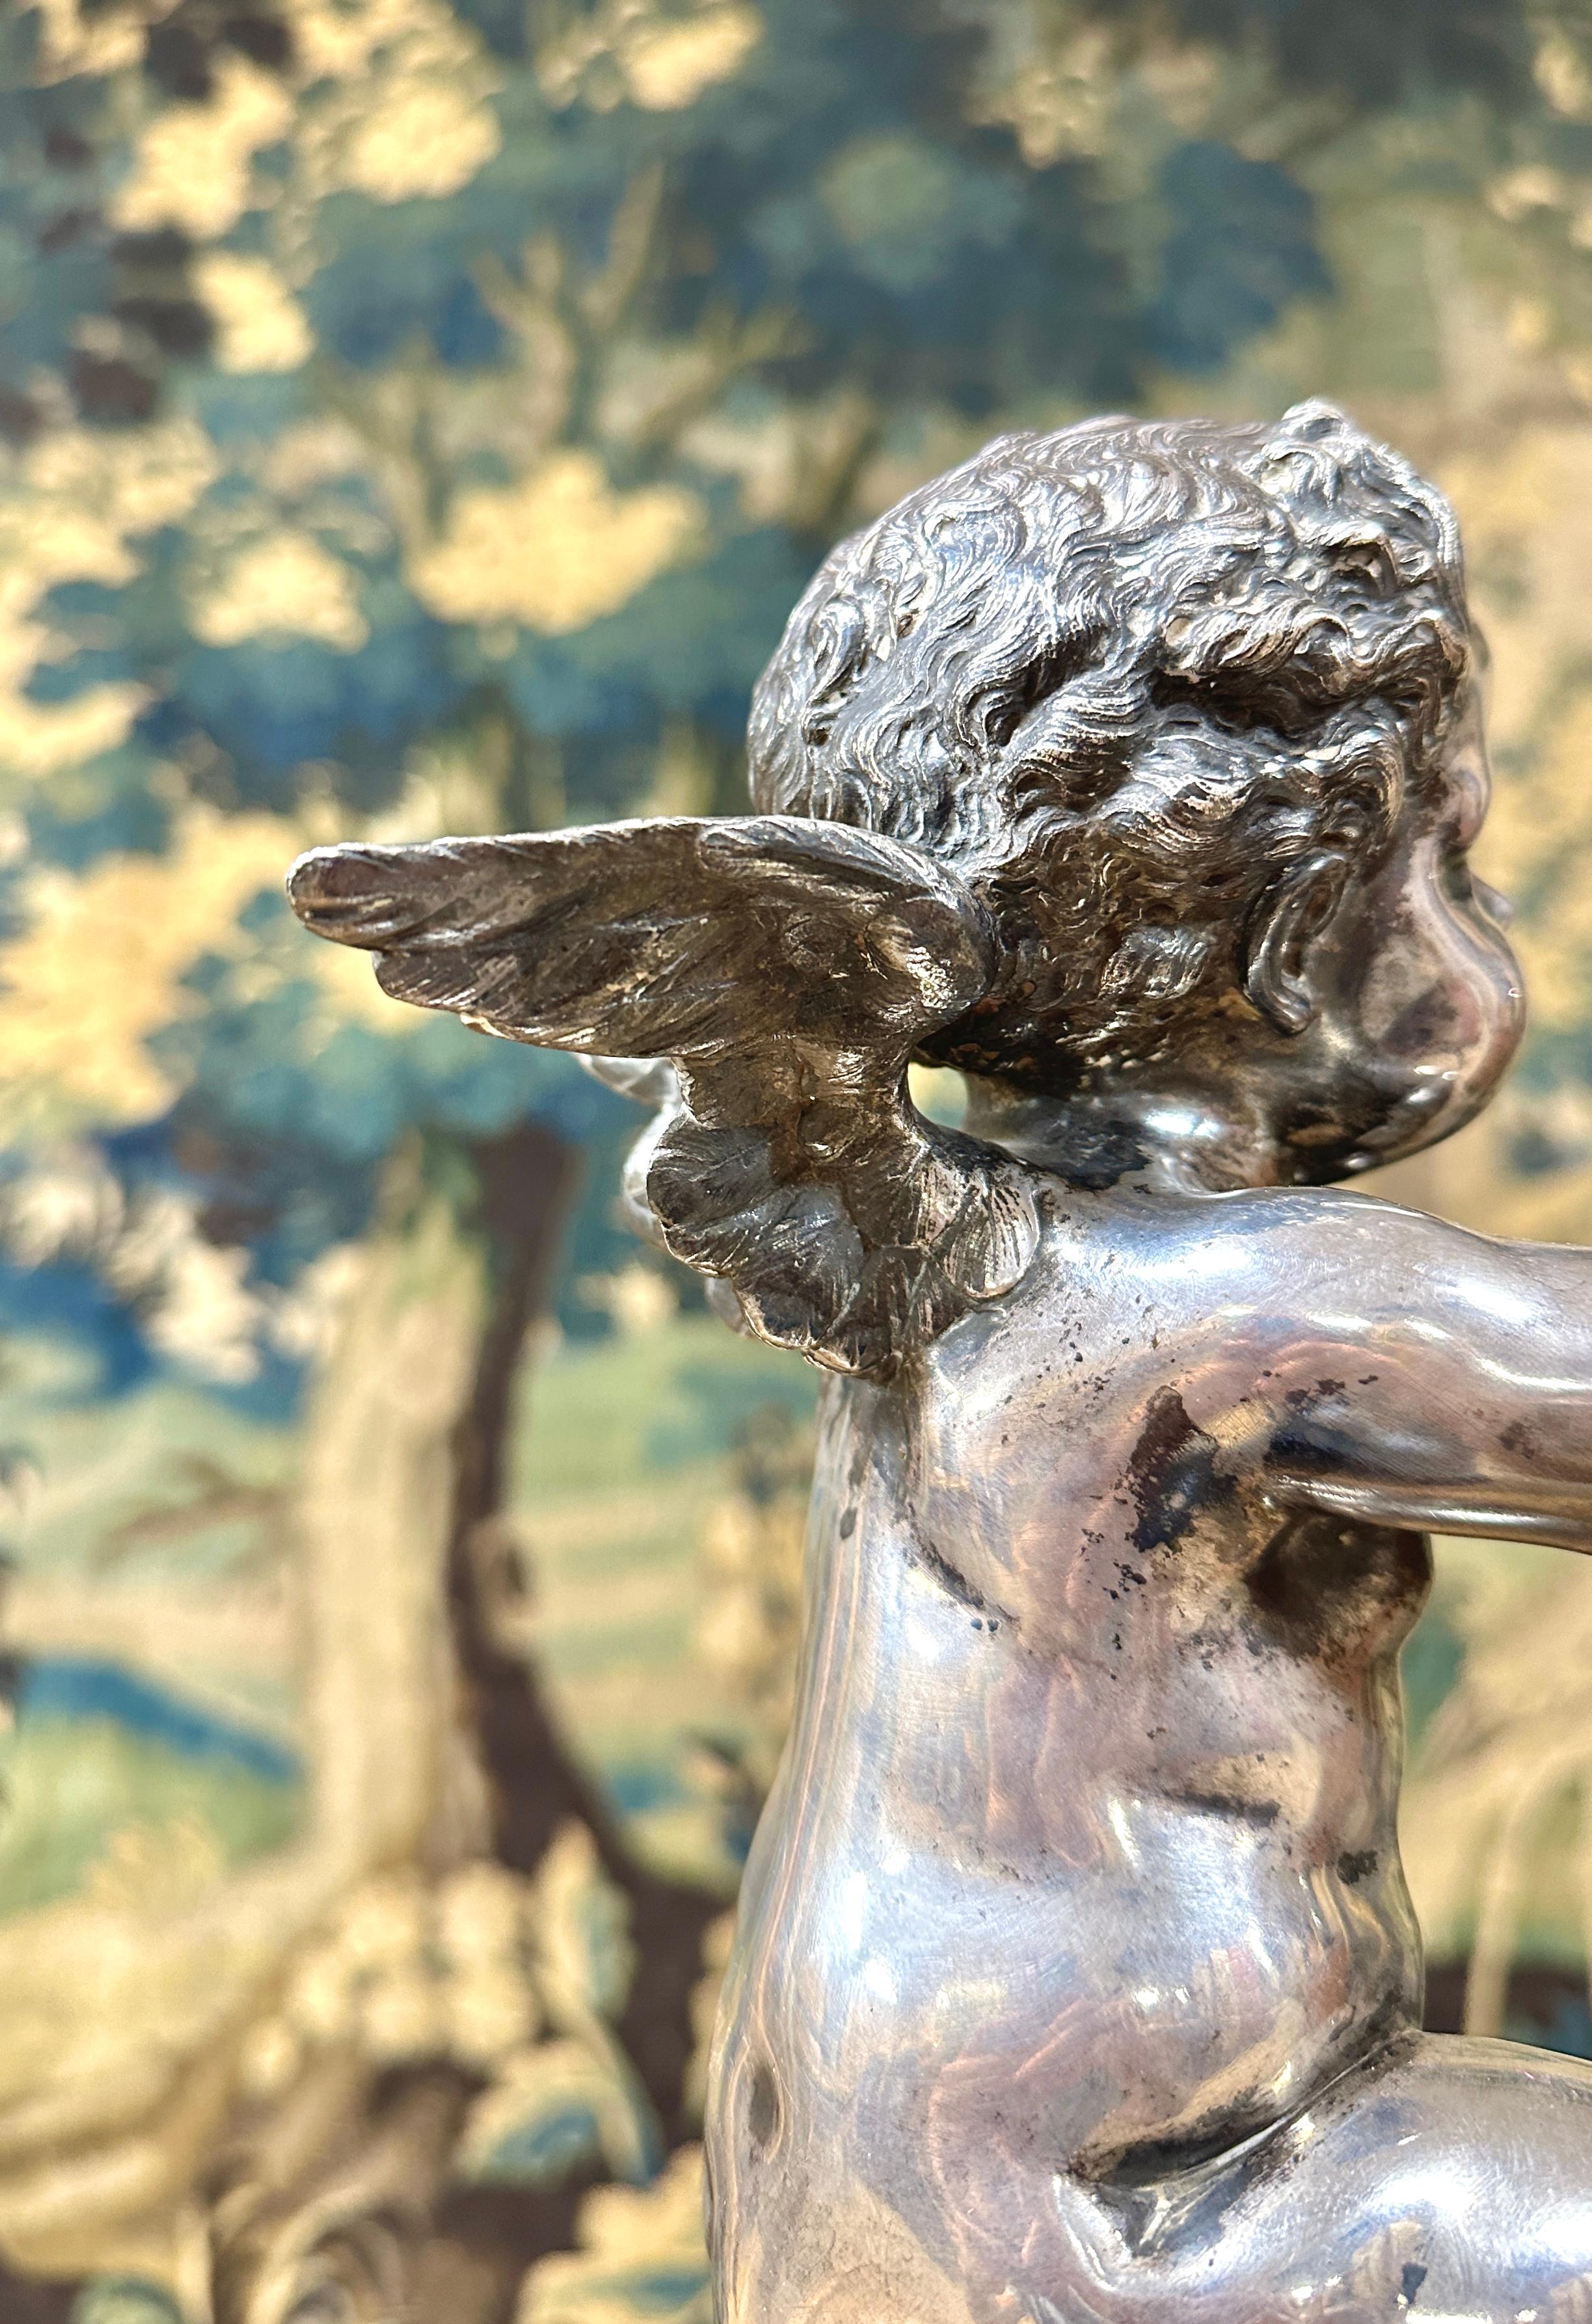 Napoleon III Louis Kley - Bronze With Cupid With Silver Patina Dated 1877 For Sale